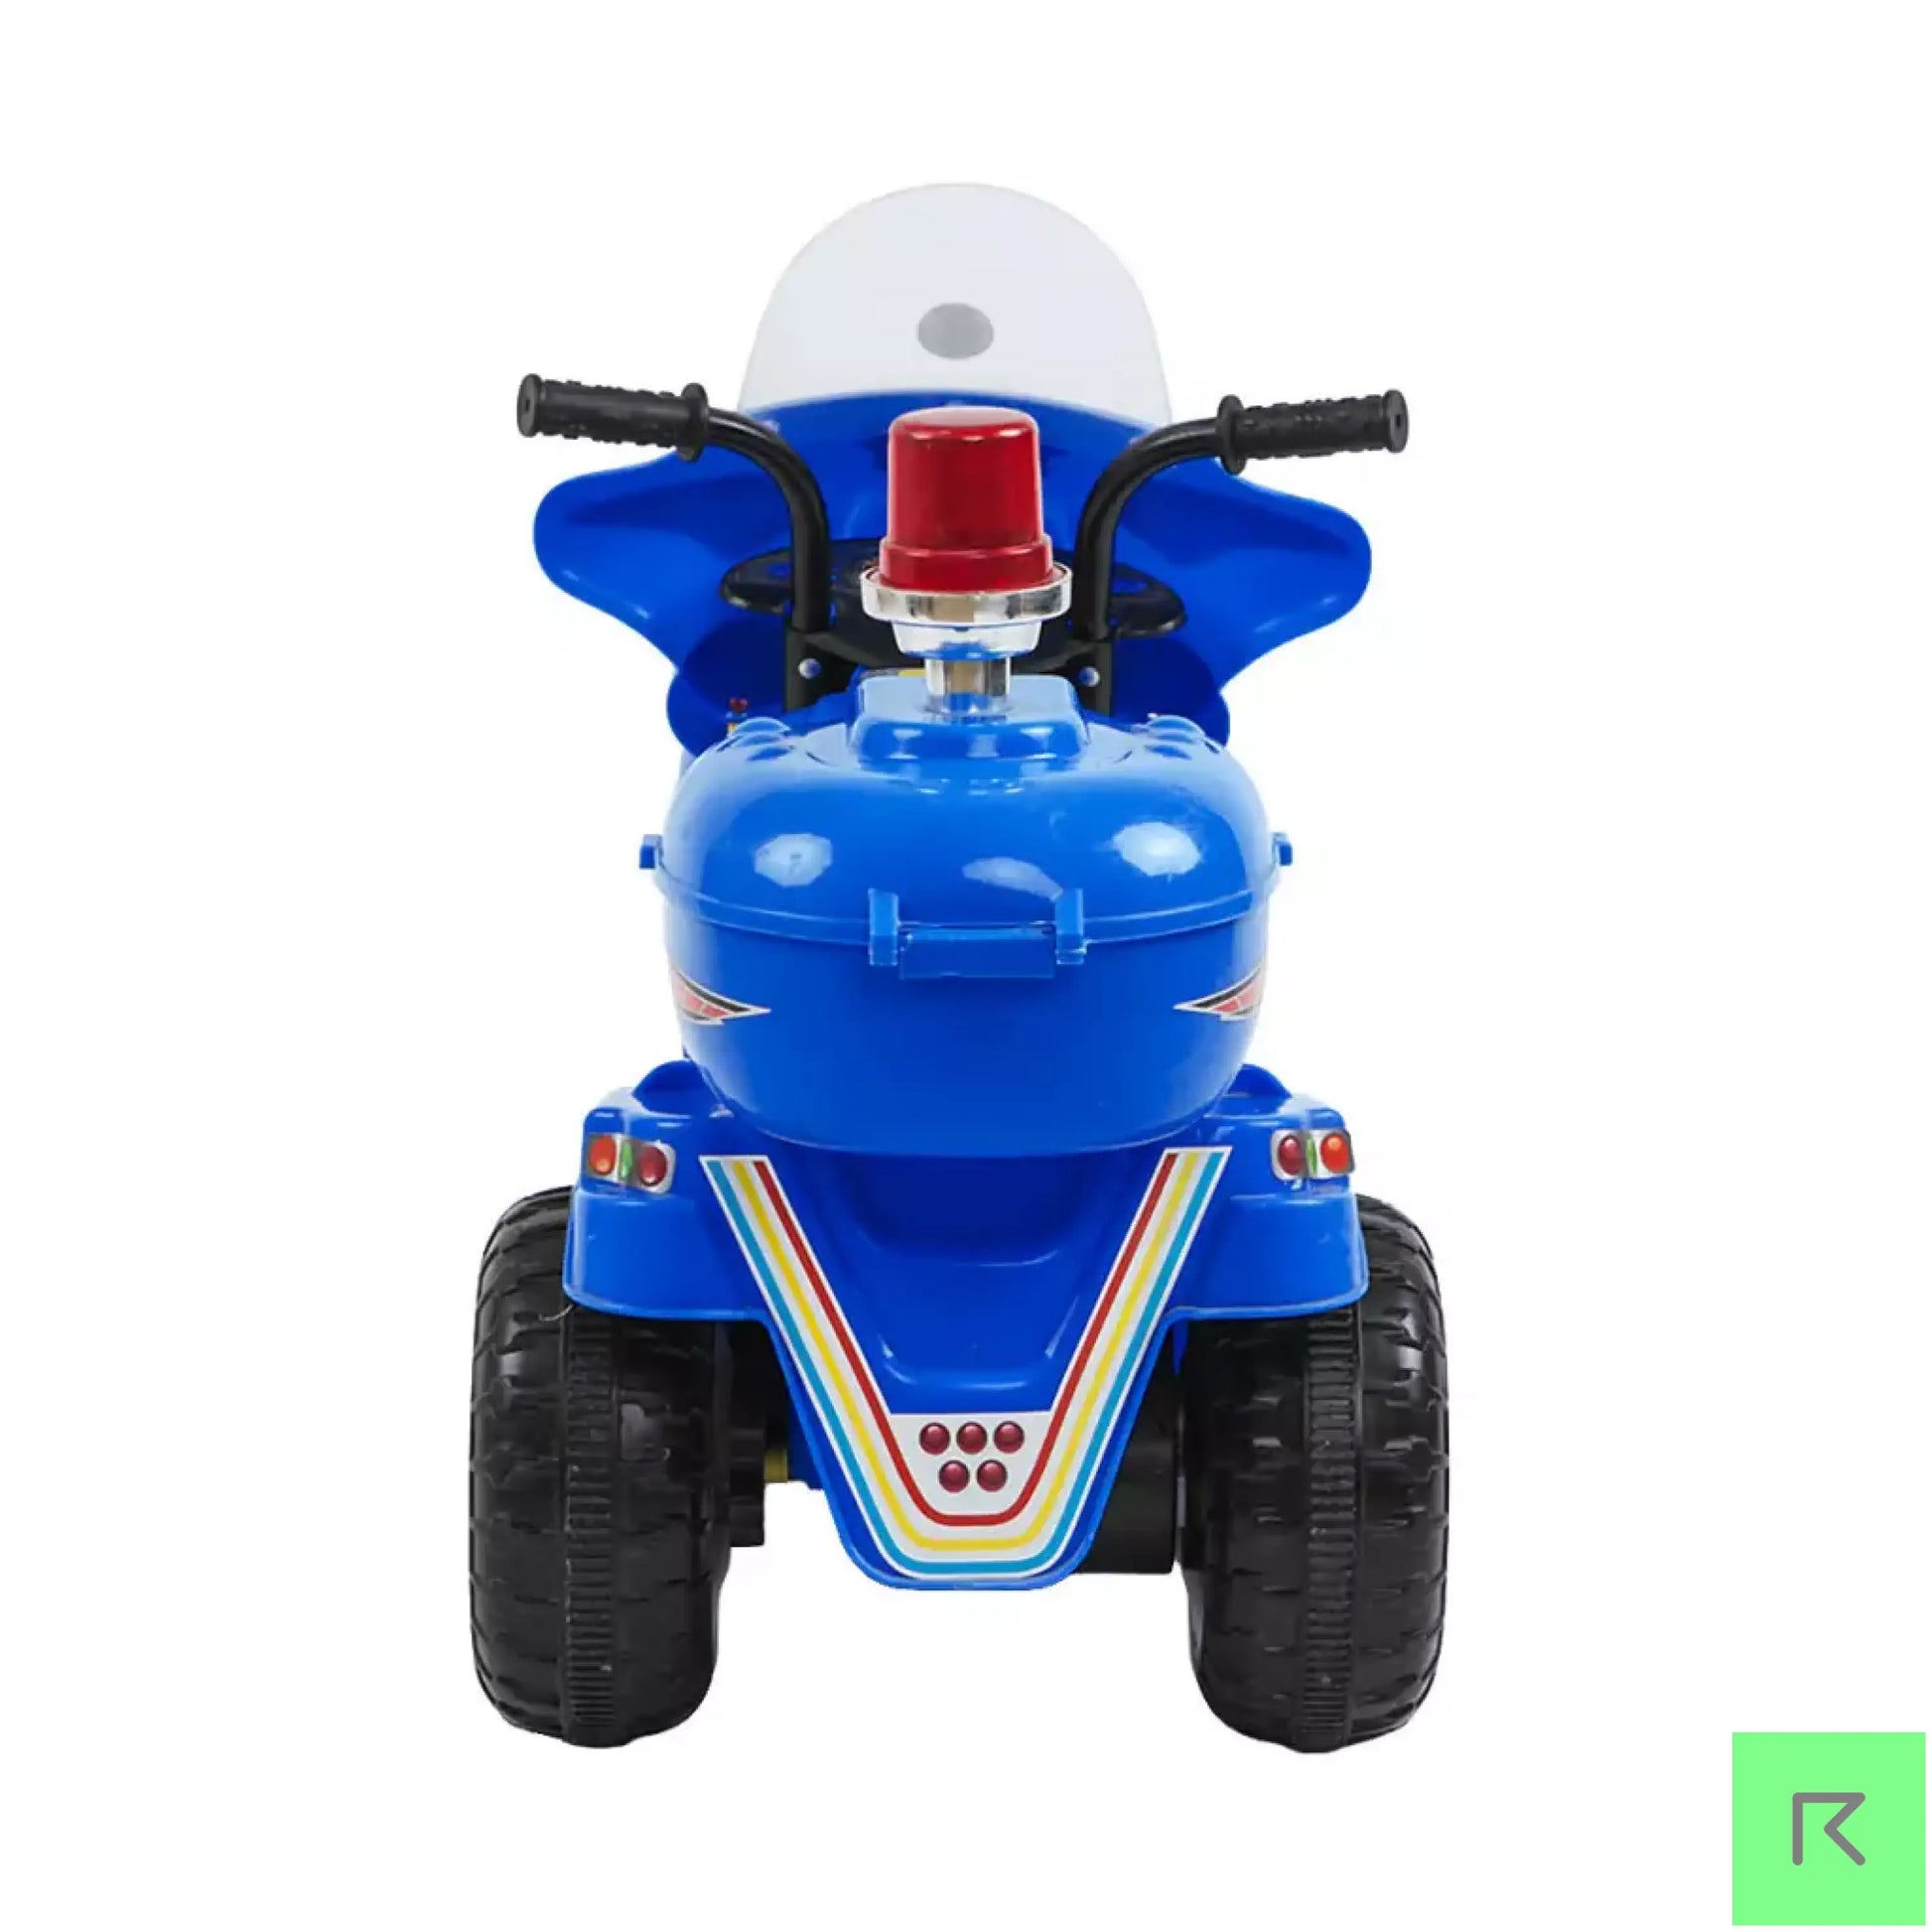 Children’s Electric Ride-on Motorcycle (Blue) Rechargeable